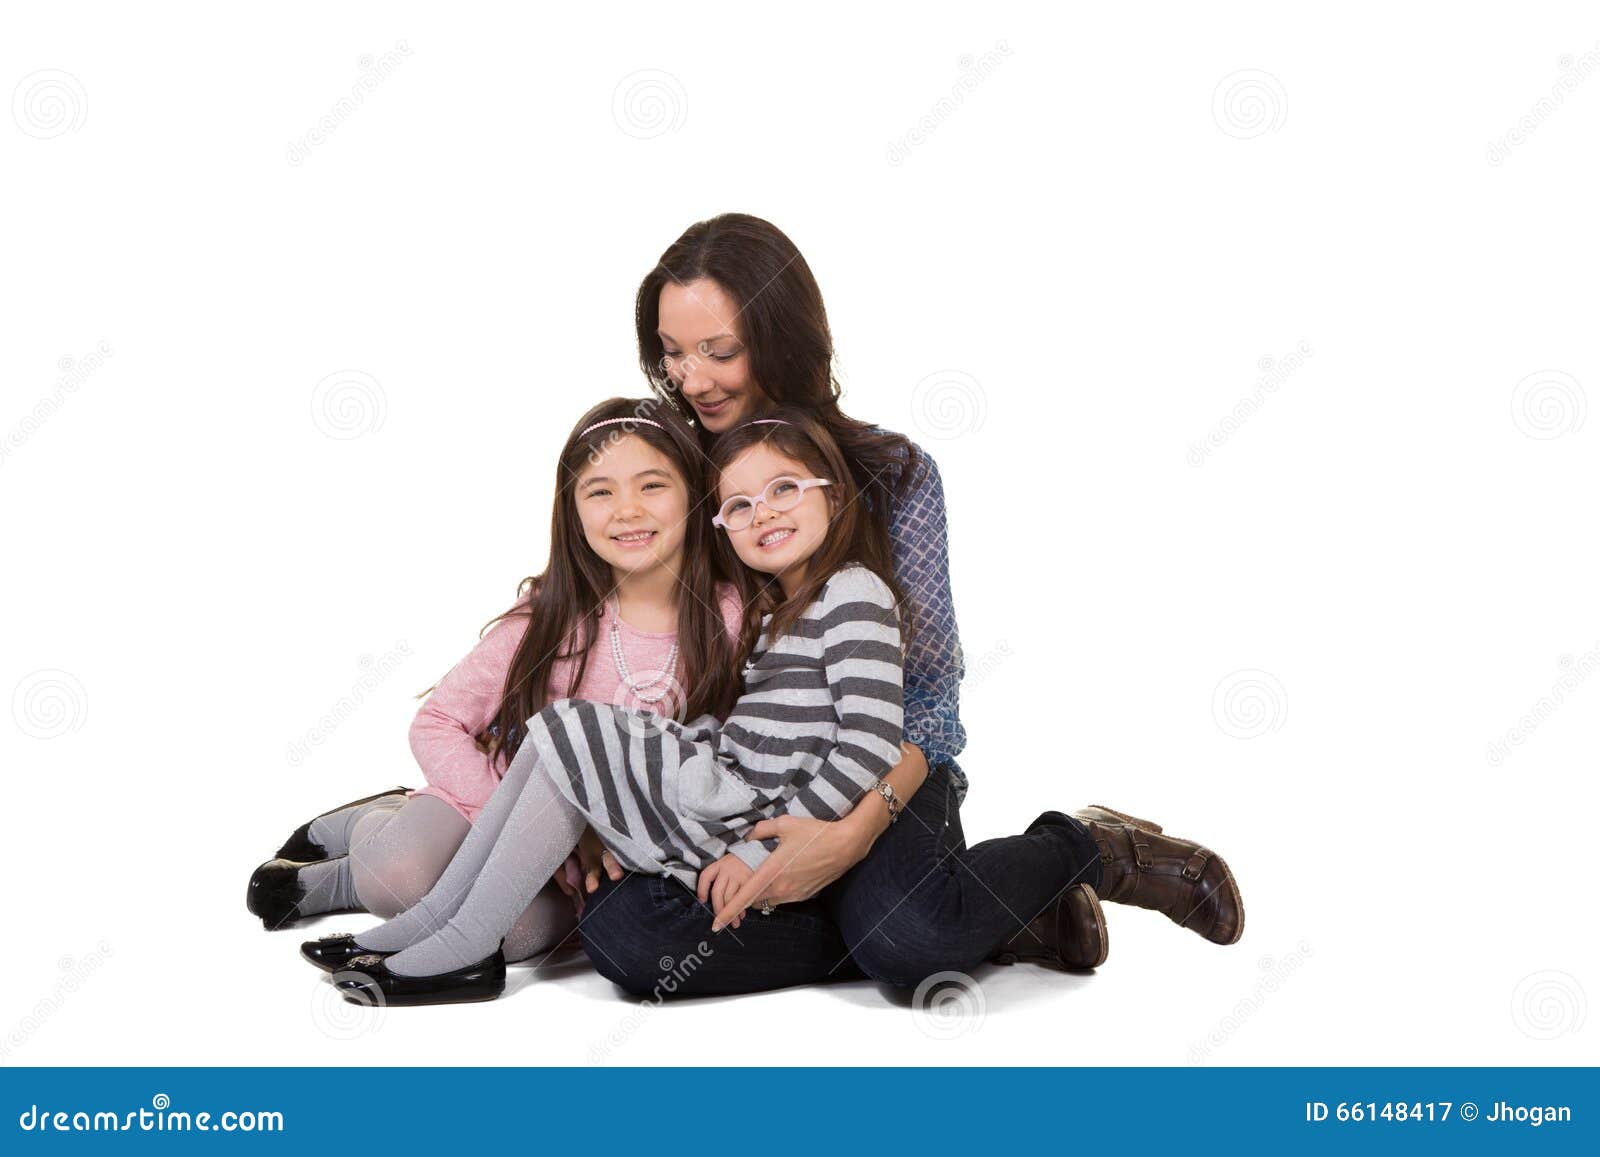 A Mother And Her Daughters Stock Image Image Of People 66148417